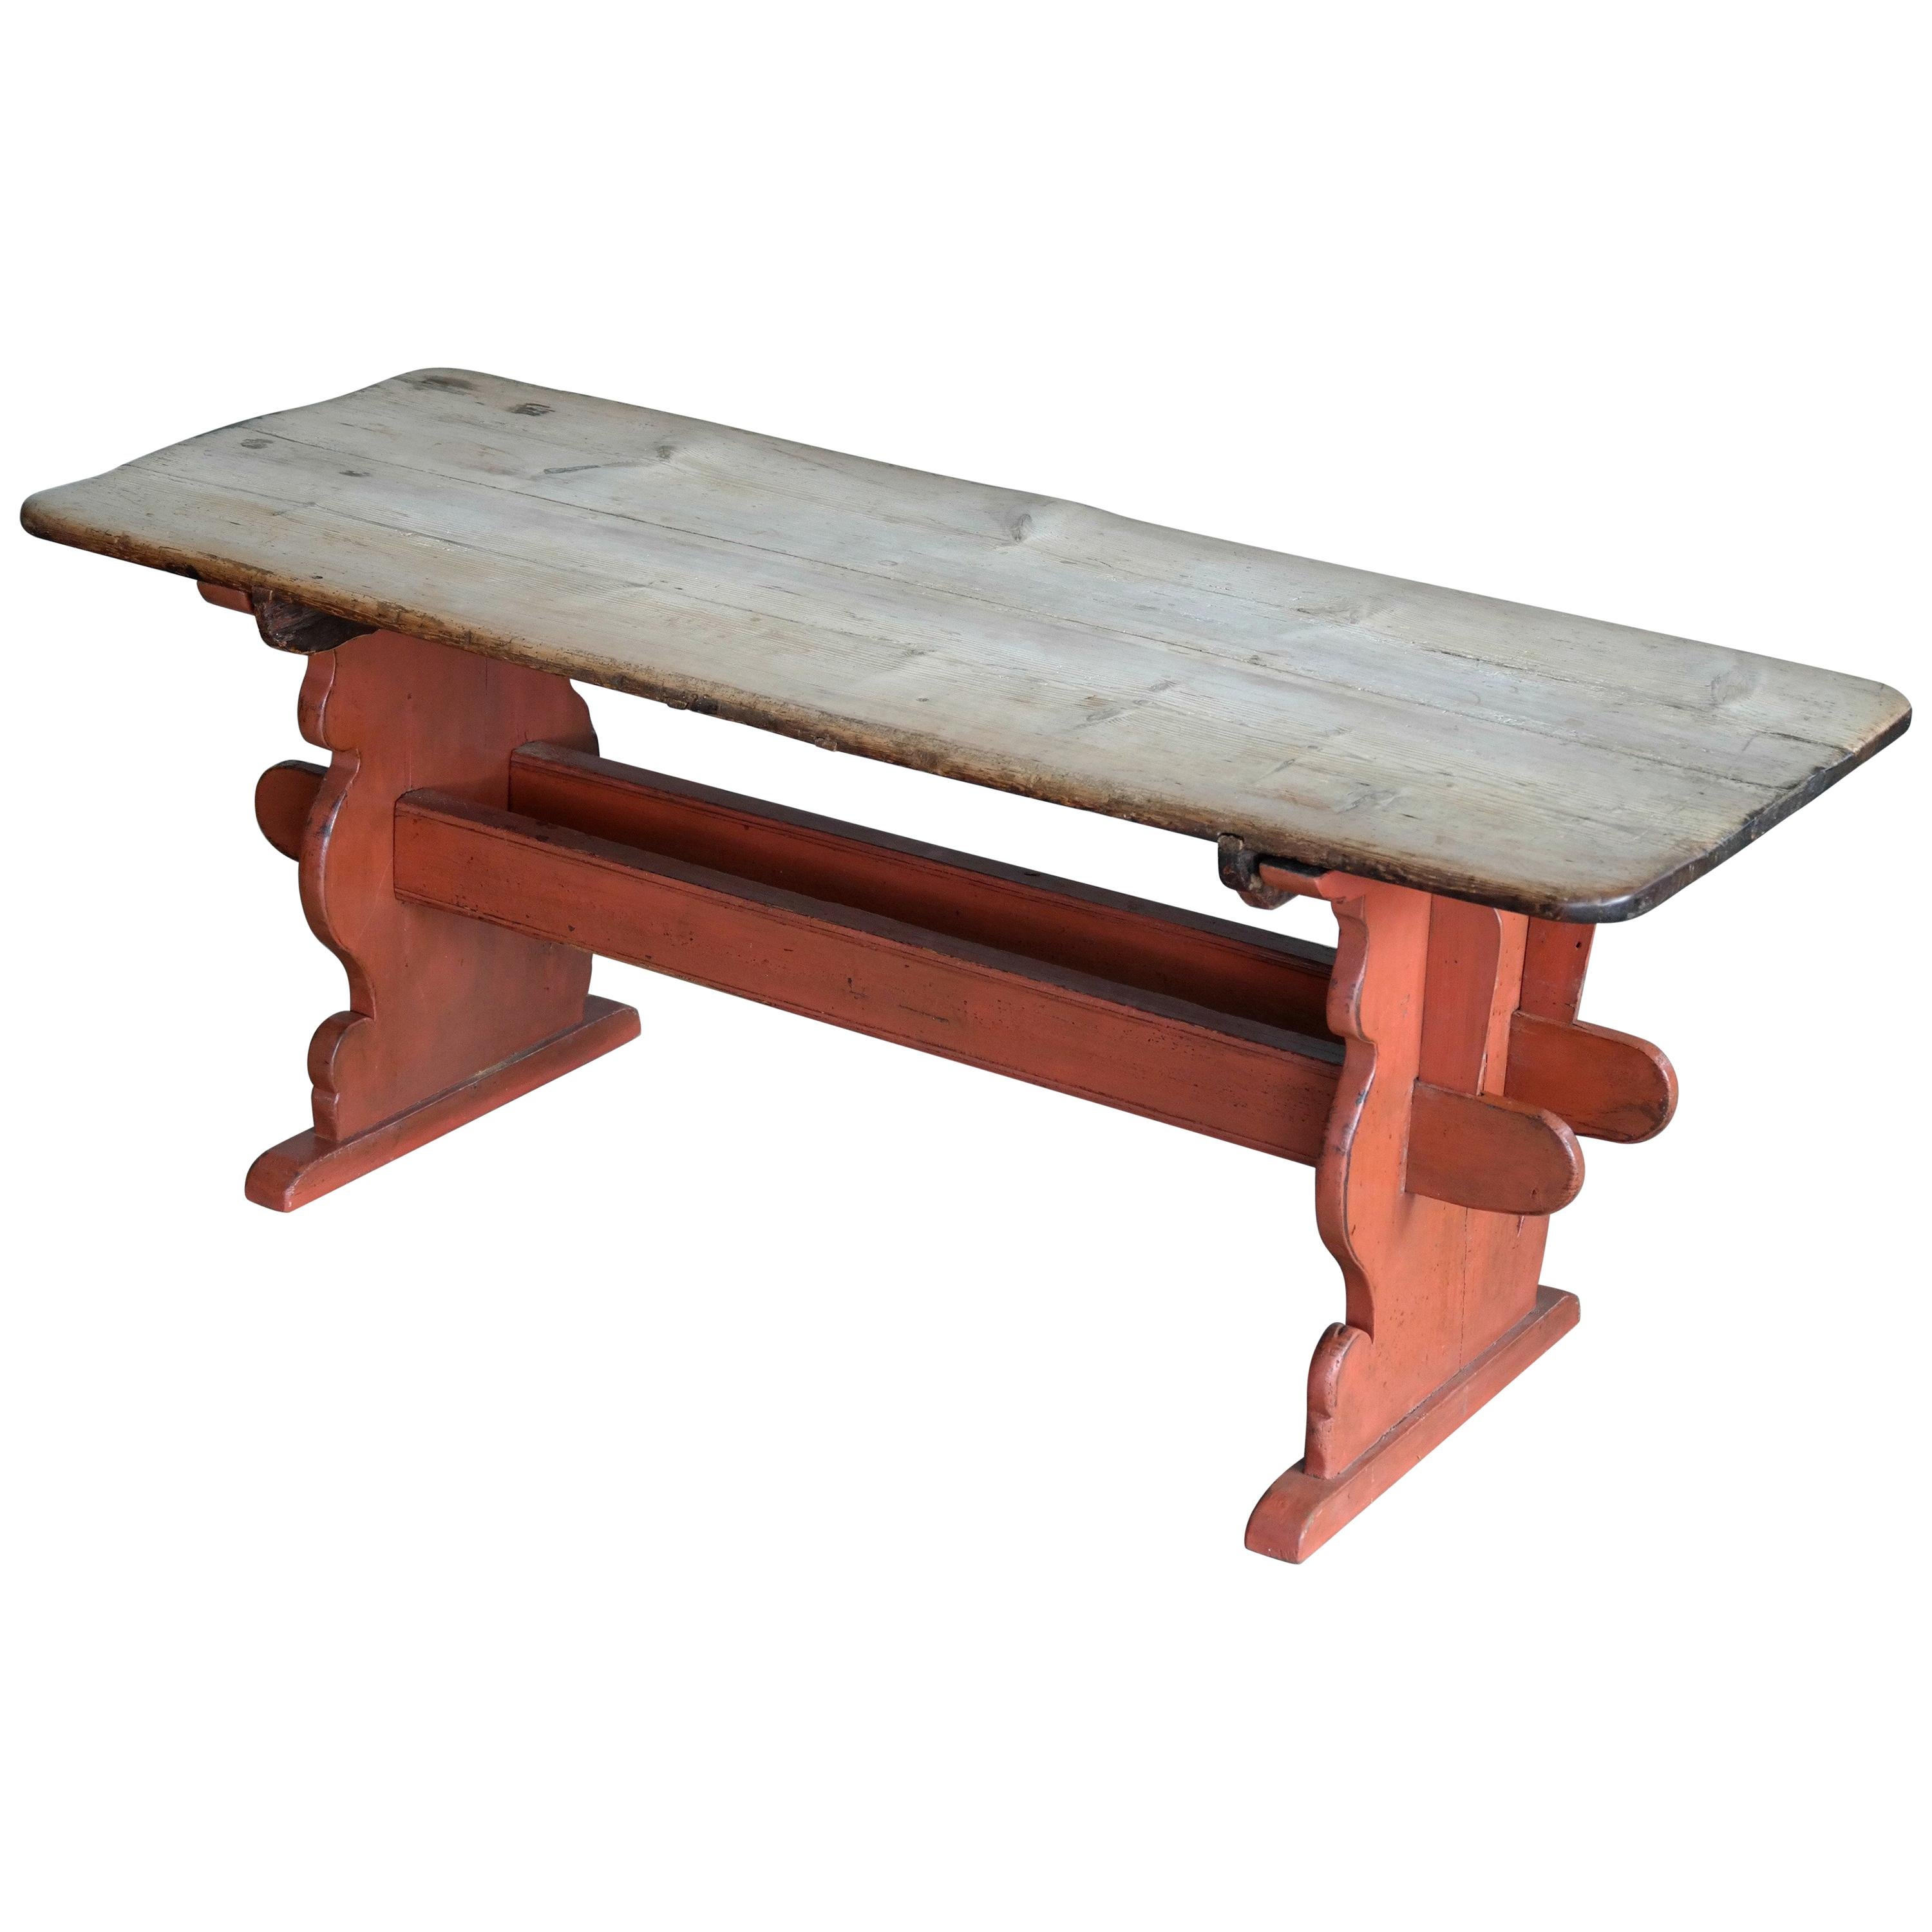 Country or Provence Style Dining Table in Rustic Pine from Denmark, circa 1900